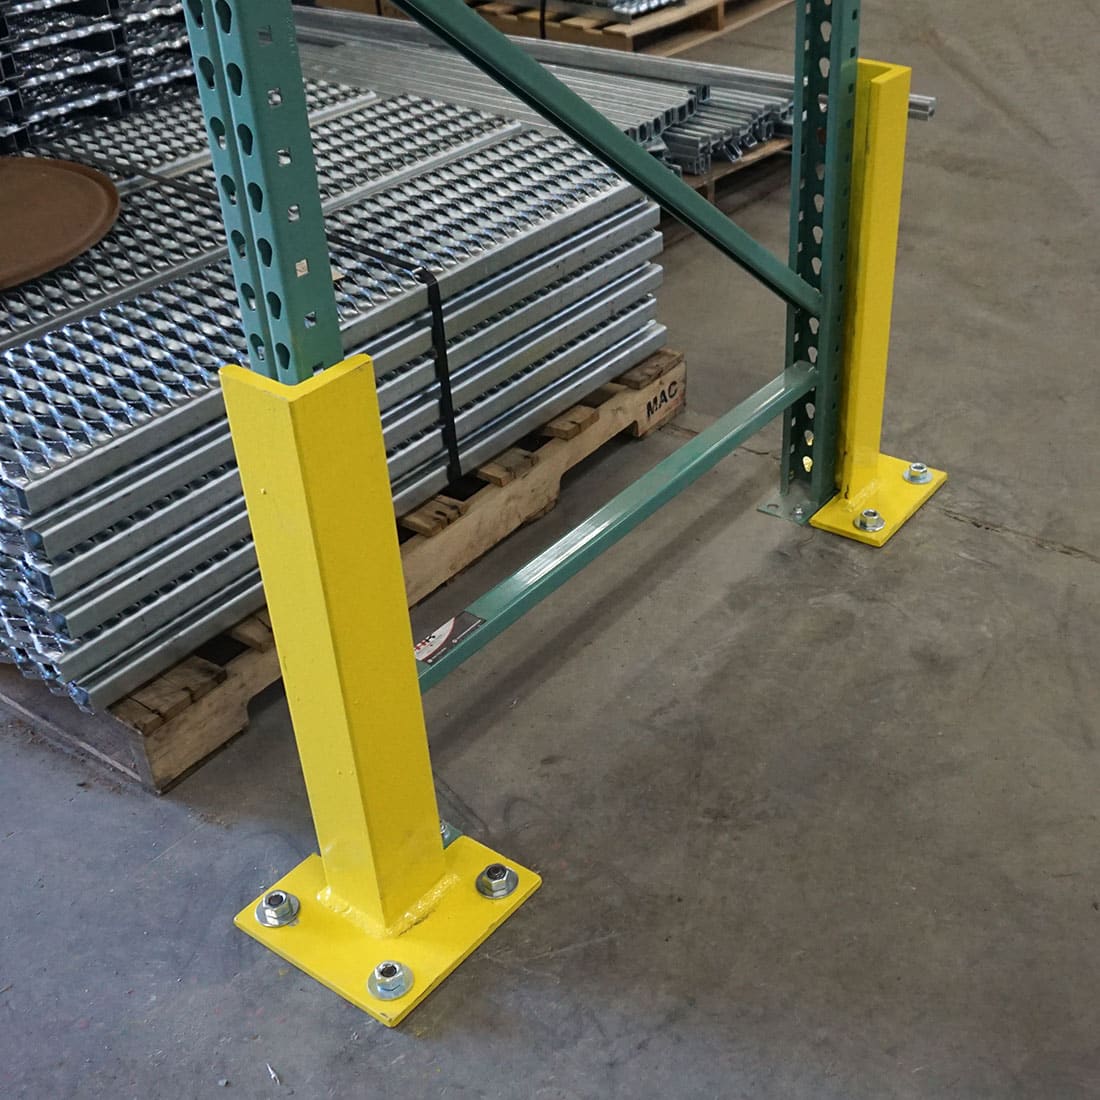 Pallet Rack Guards | Rack Guards | Custom Metal Fabricators | MFS | Metal Fabrication Services | a Division of Eberl Iron Works, Inc. | Buffalo, NY USA